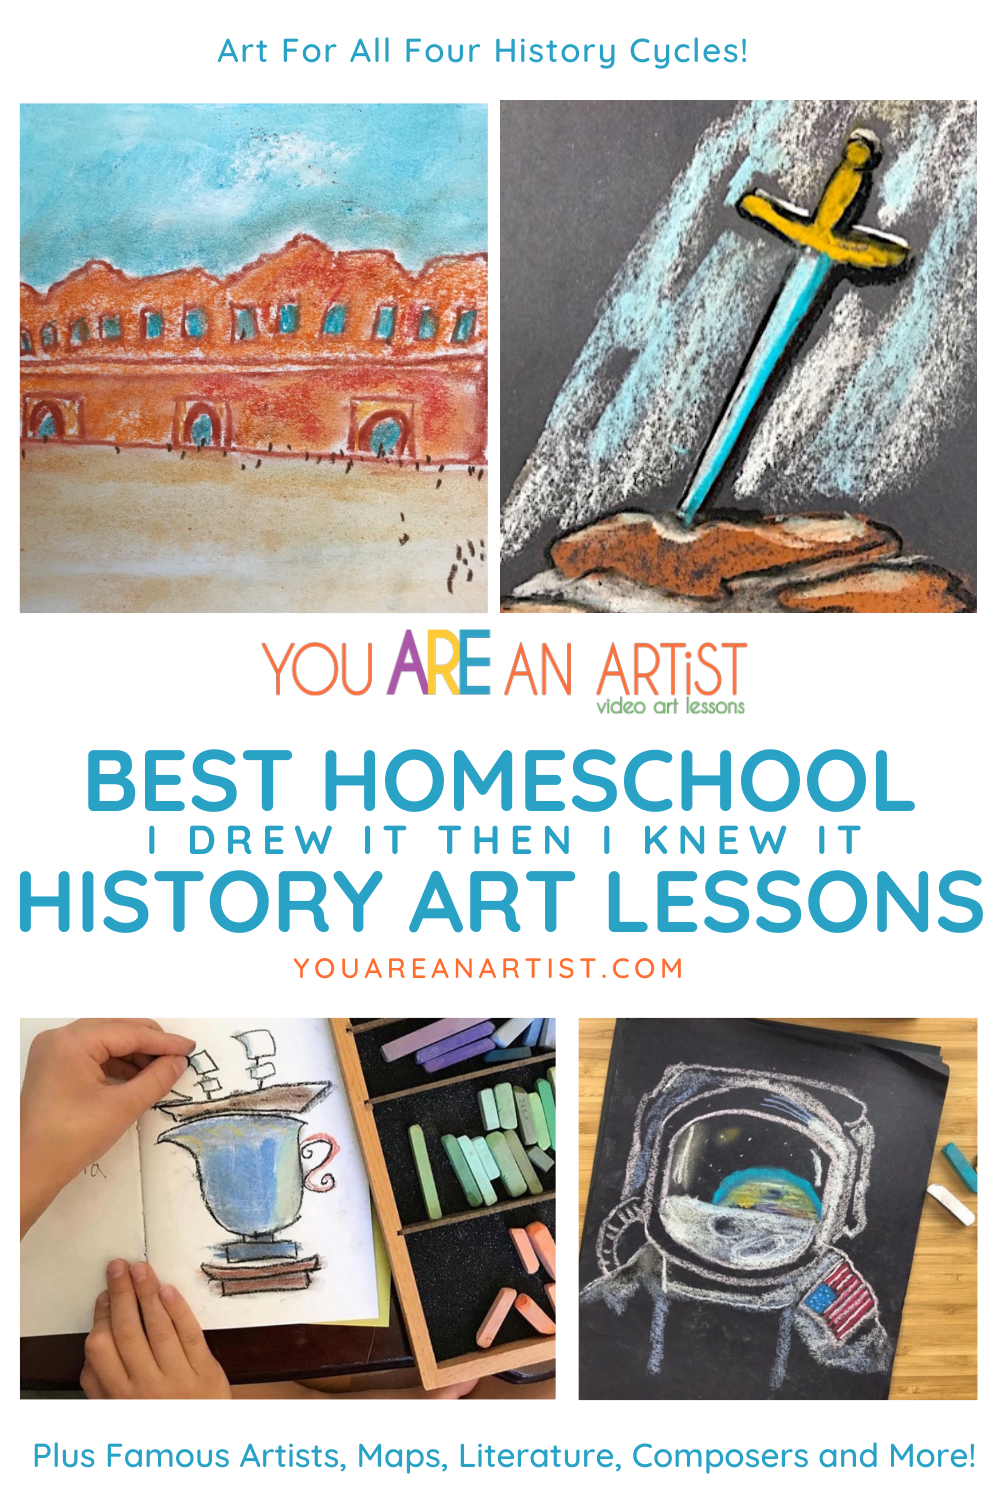 https://chalkpastel.com/wp-content/uploads/2021/09/The-Best-Art-Lessons-for-Your-Homeschool-History-Curriculum.png